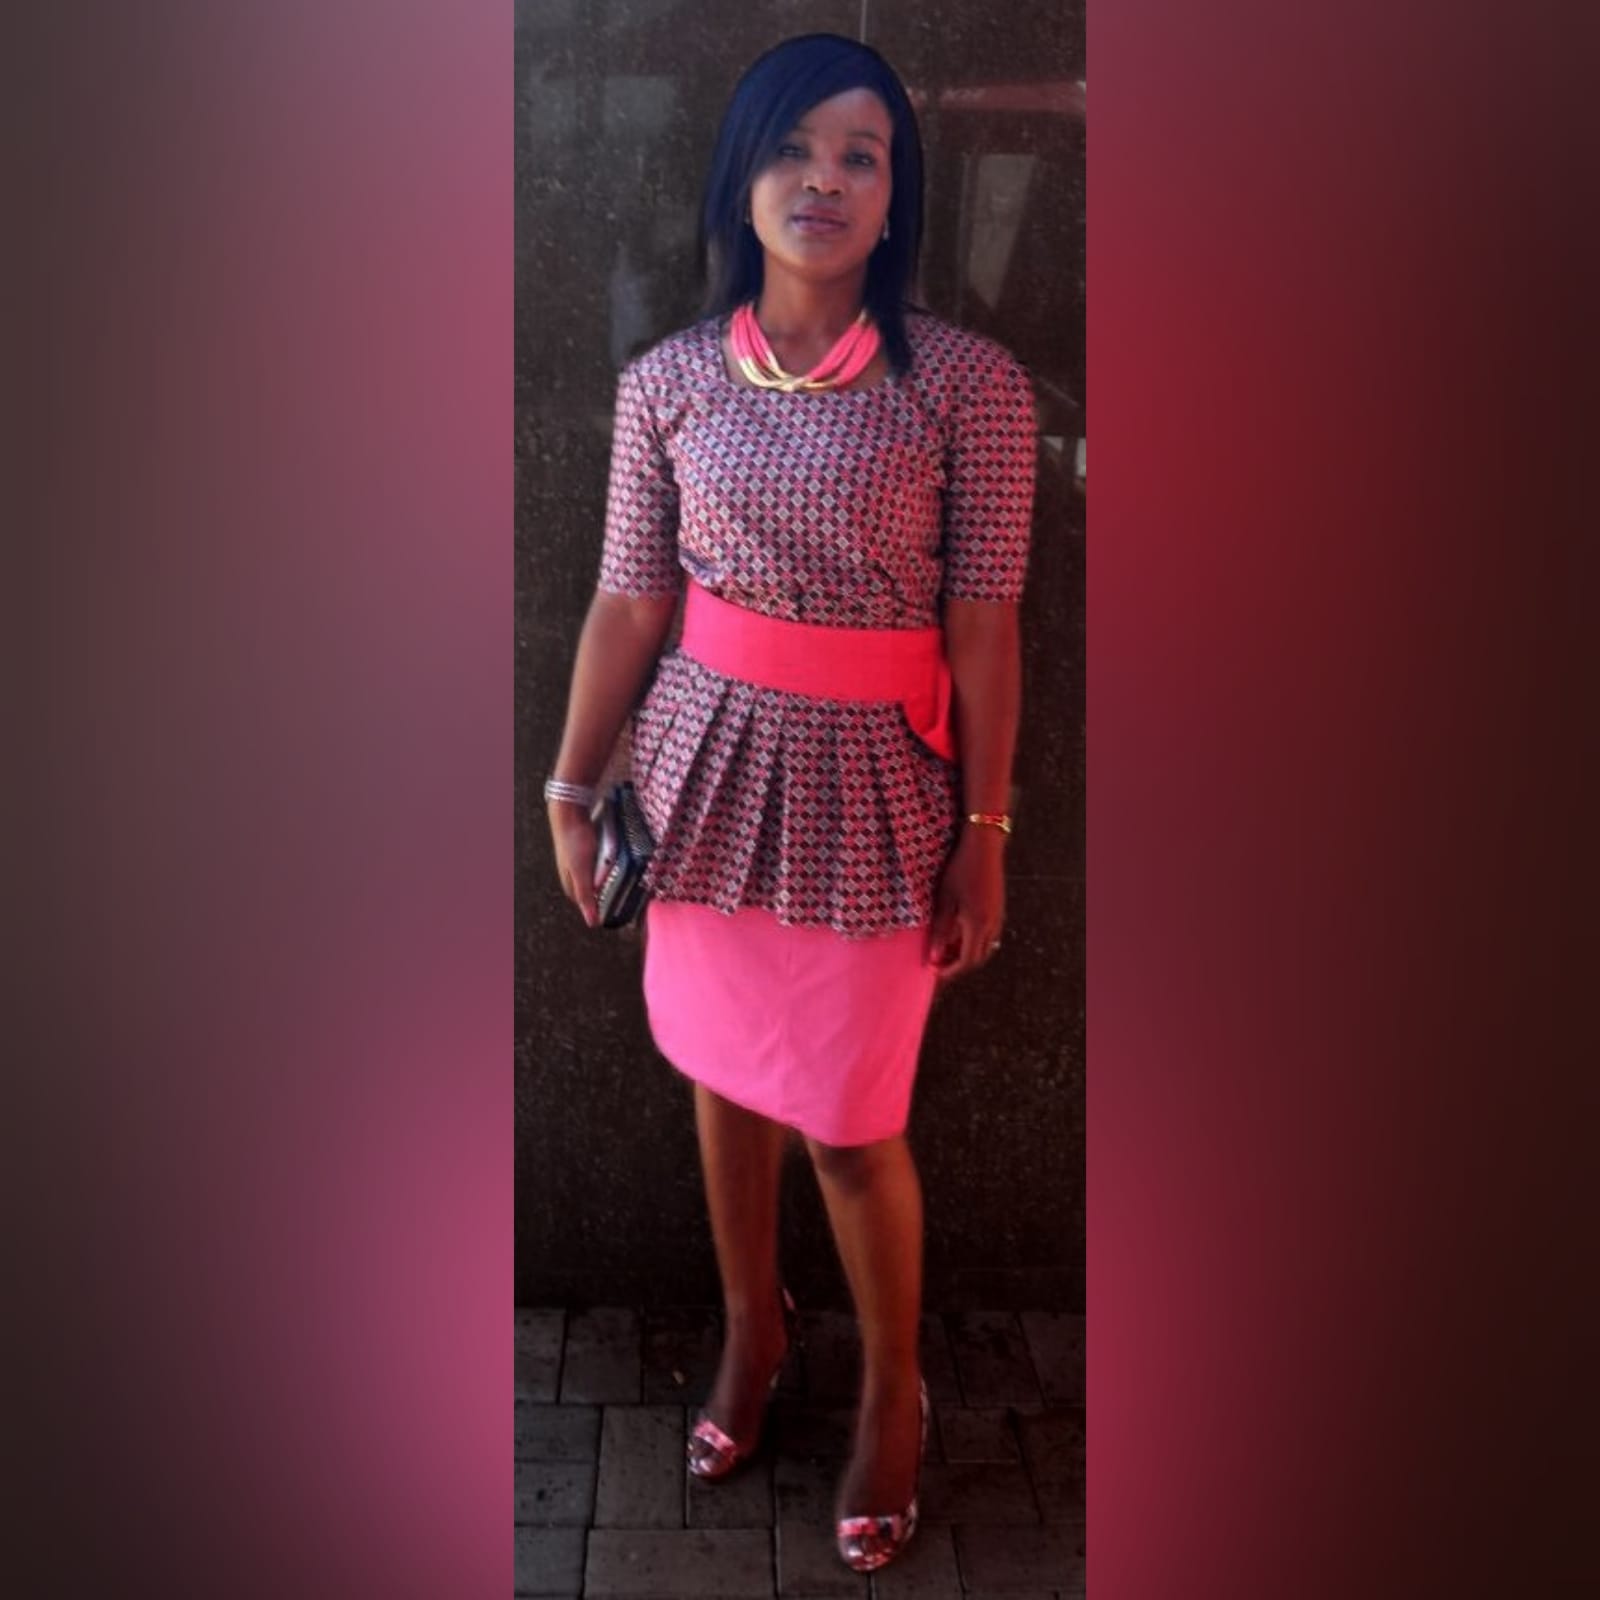 Pink pencil skirt and traditional top in xhosa print 1 a stretch pencil skirt and a traditional top with a square neckline. 3/4 sleeves & frills on the waist. Delivered to the client.